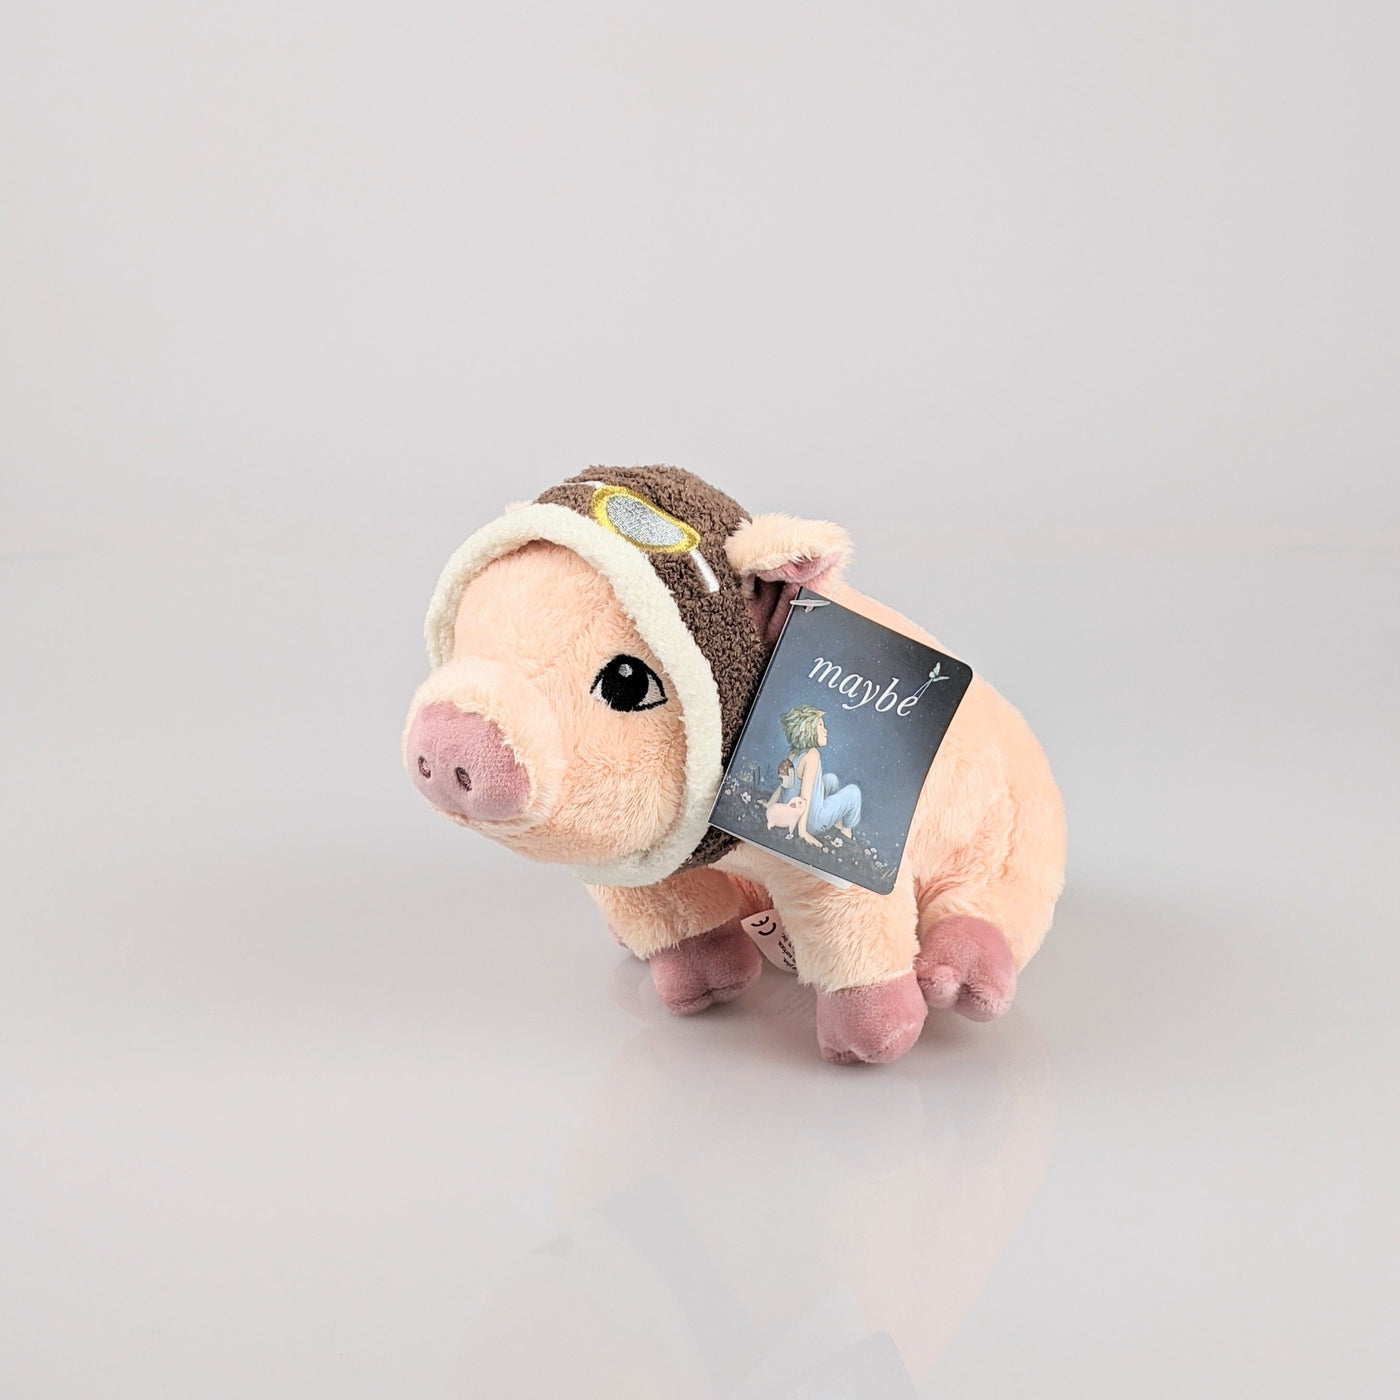 Cute, pink pig wearing aviator goggles on its head.